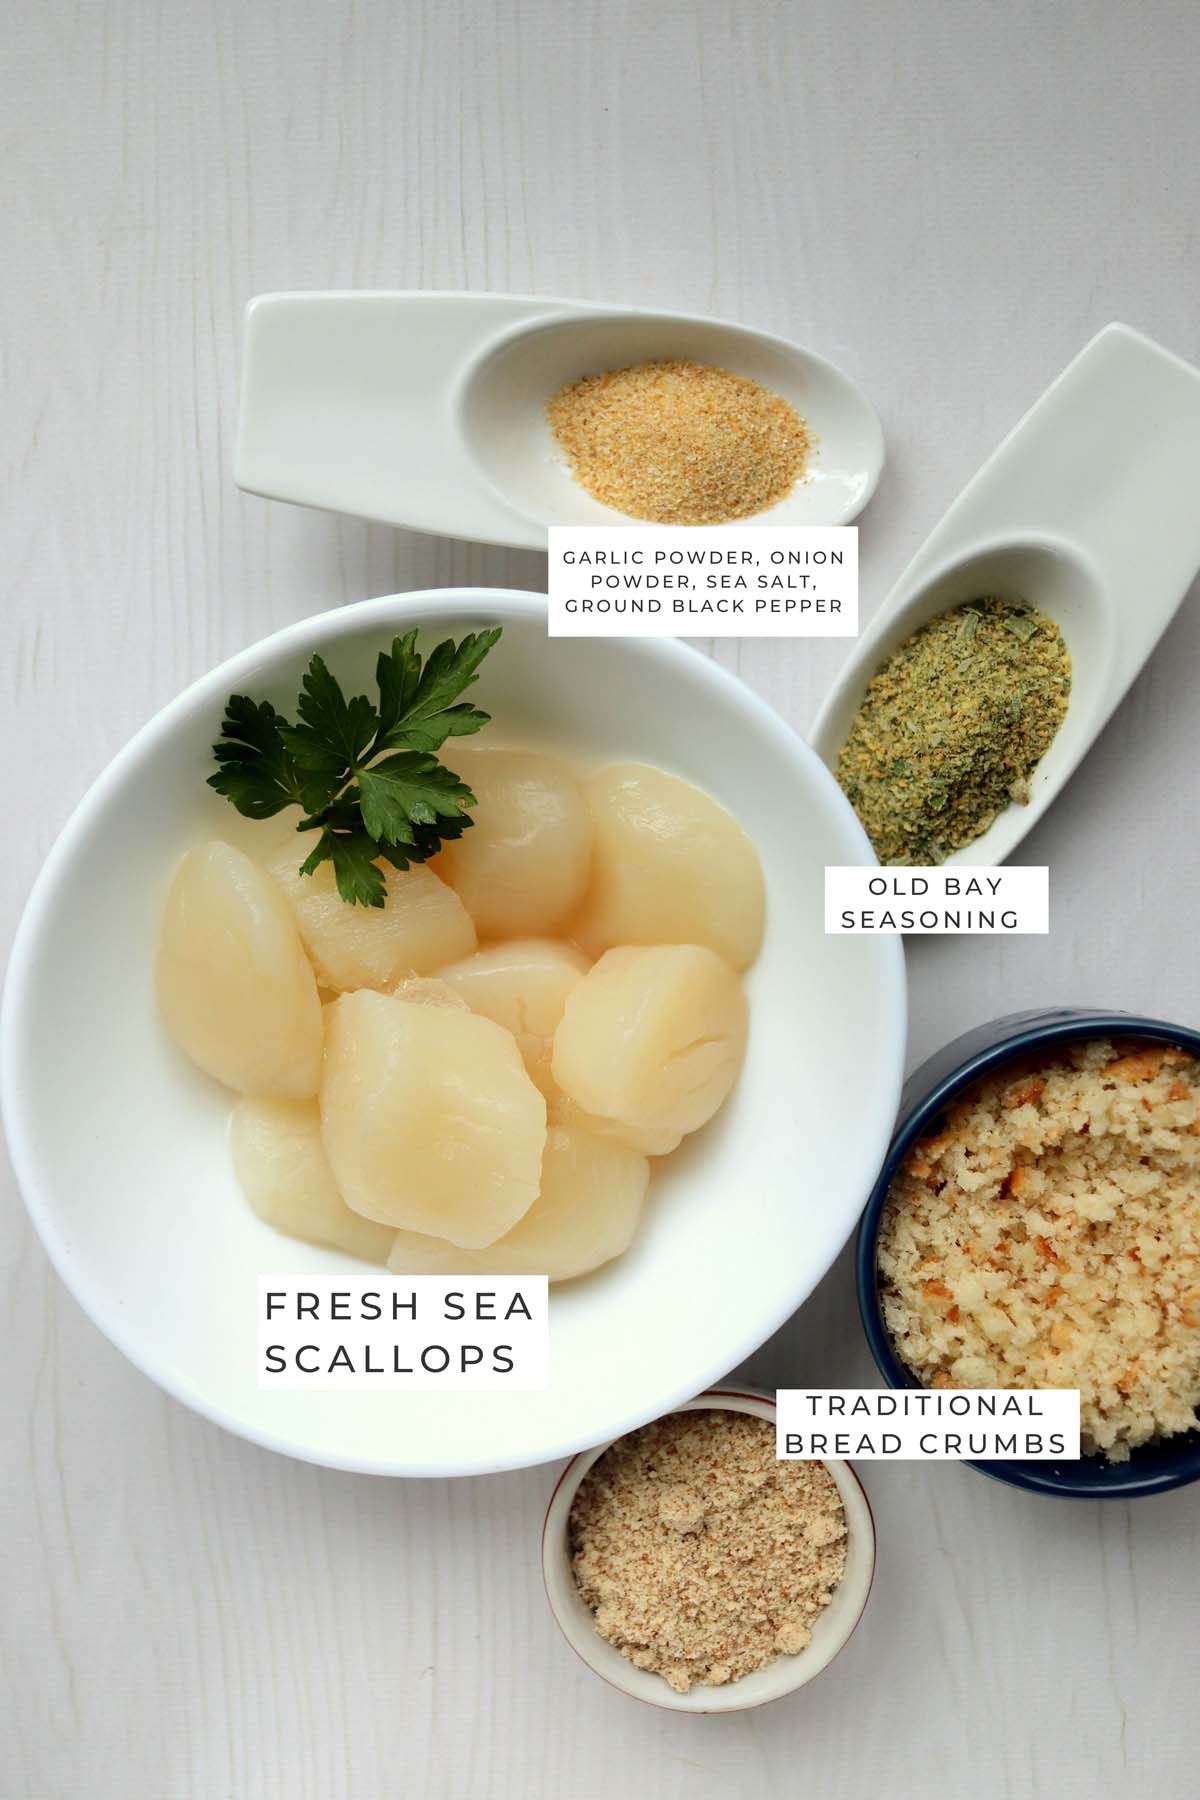 Labeled ingredients for the scallops.